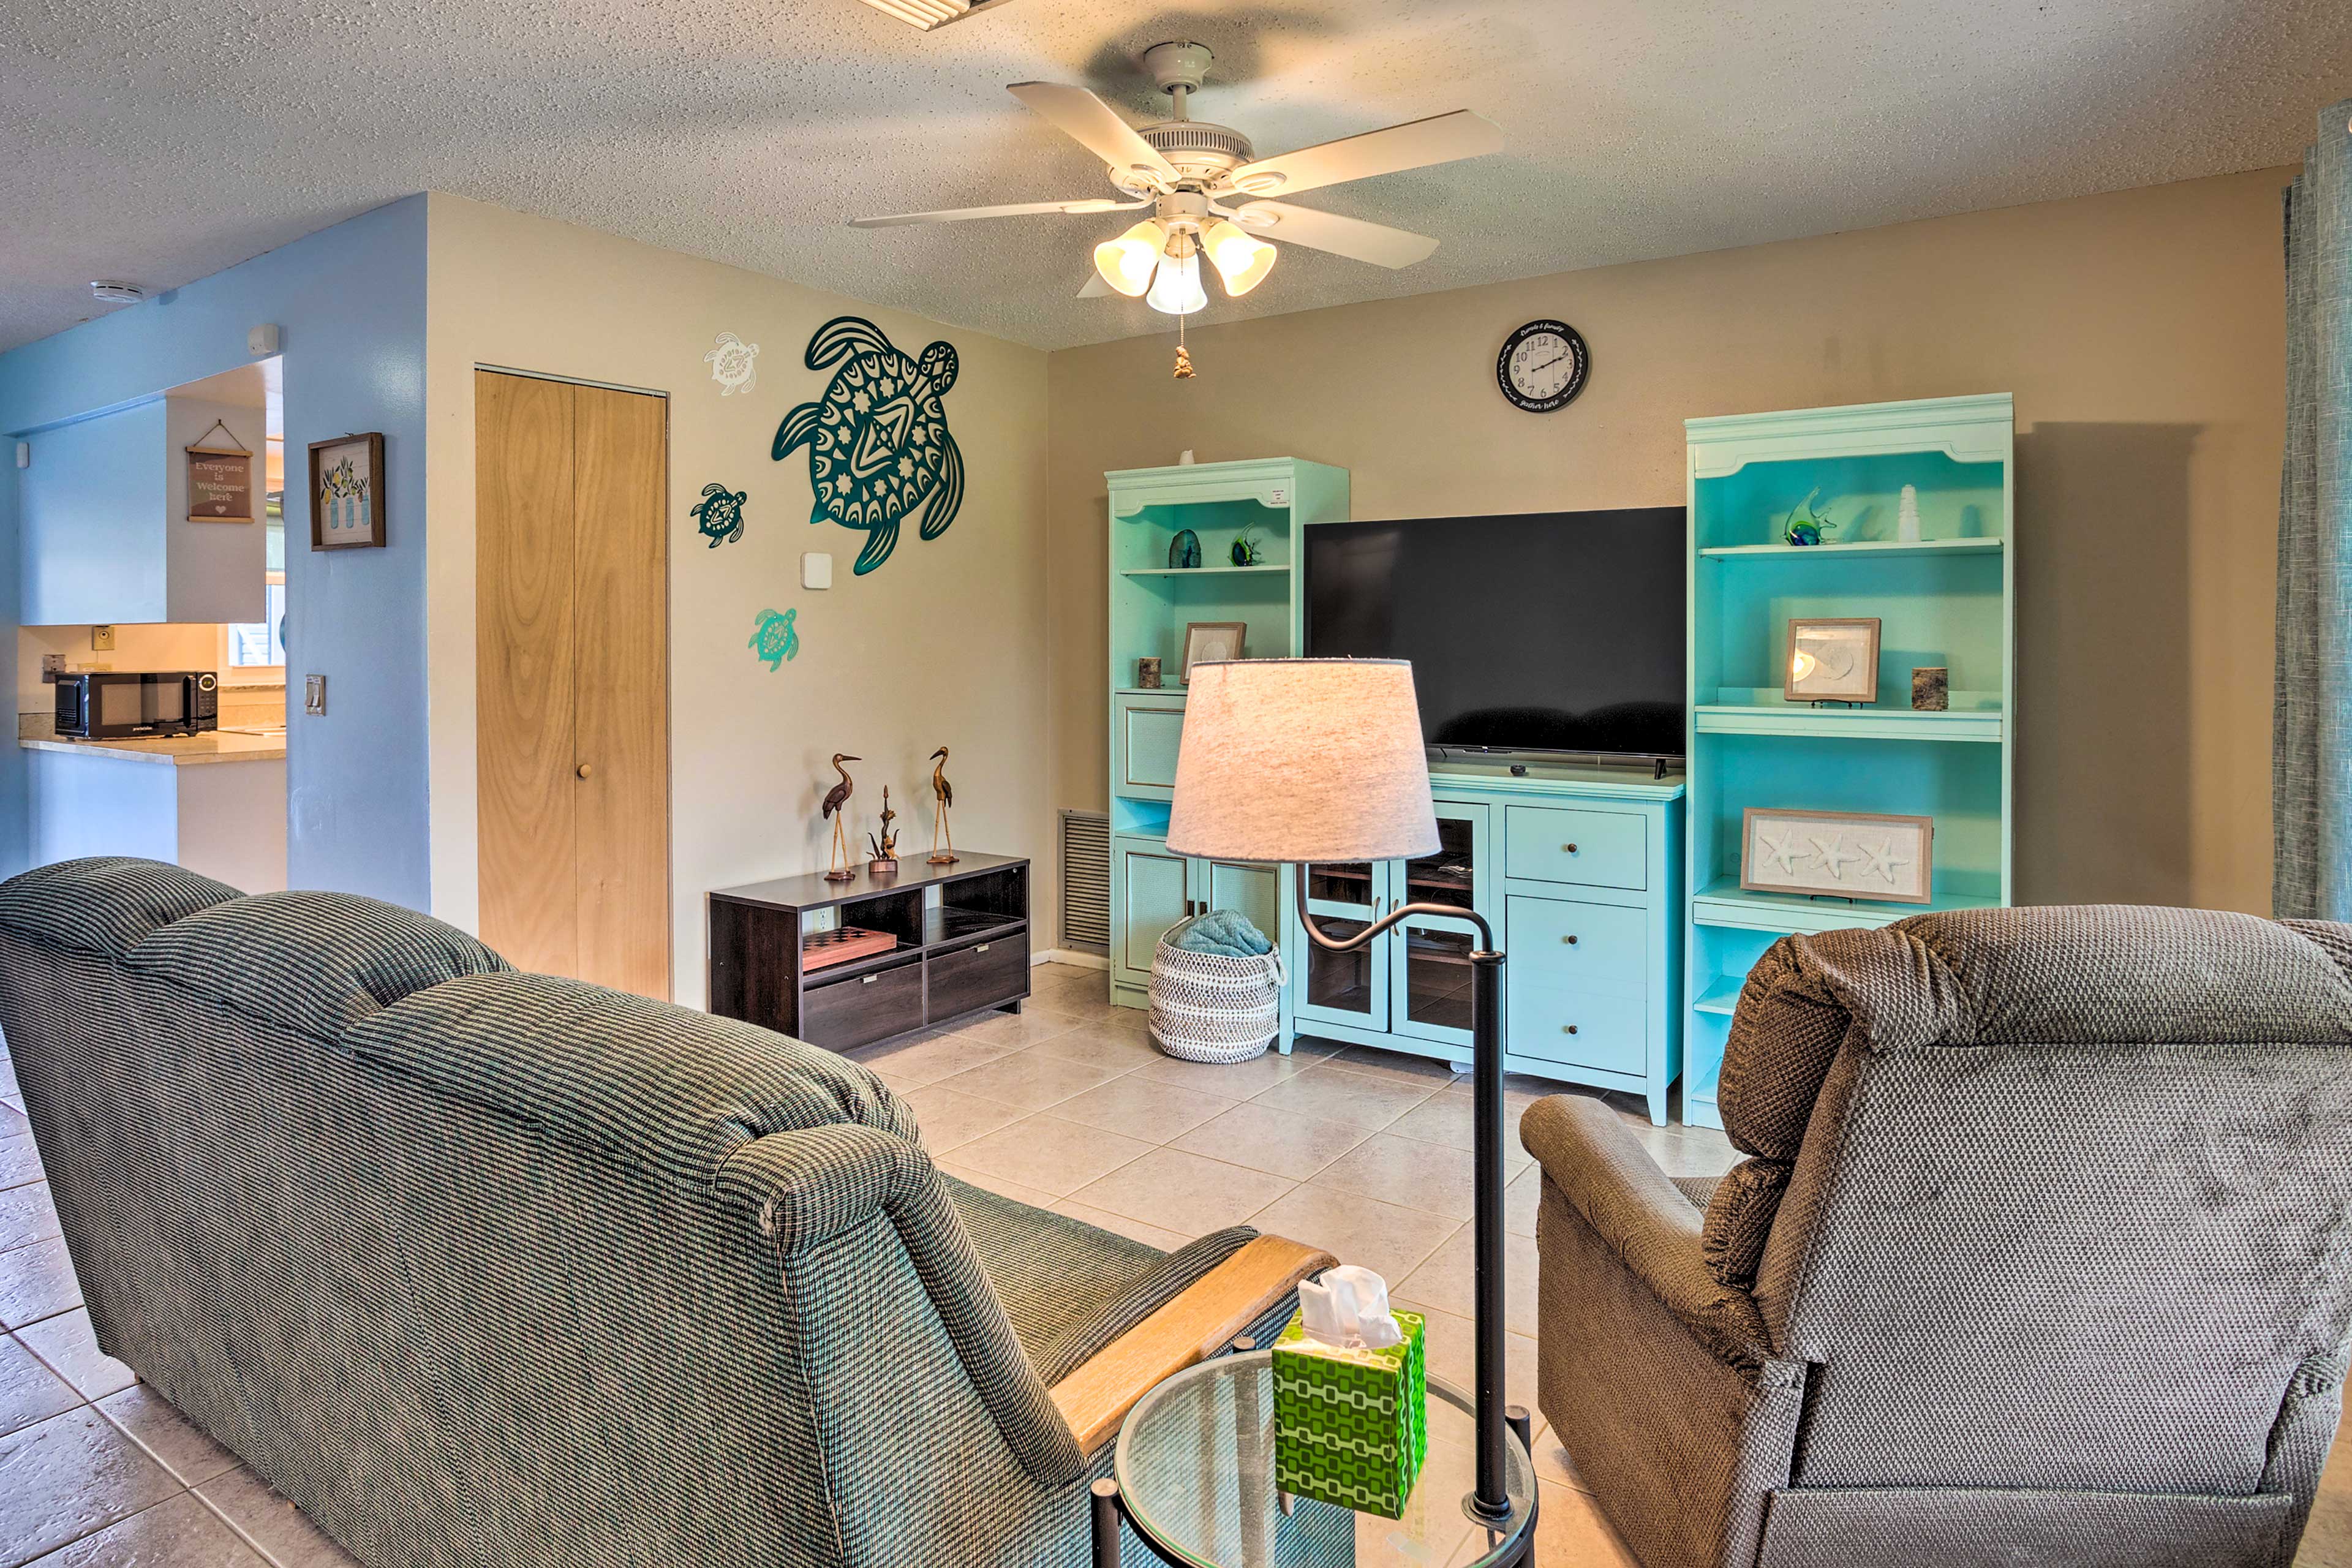 Port St Lucie Vacation Rental | 2BR | 1.5BA | 900 Sq Ft | Step-Free Access